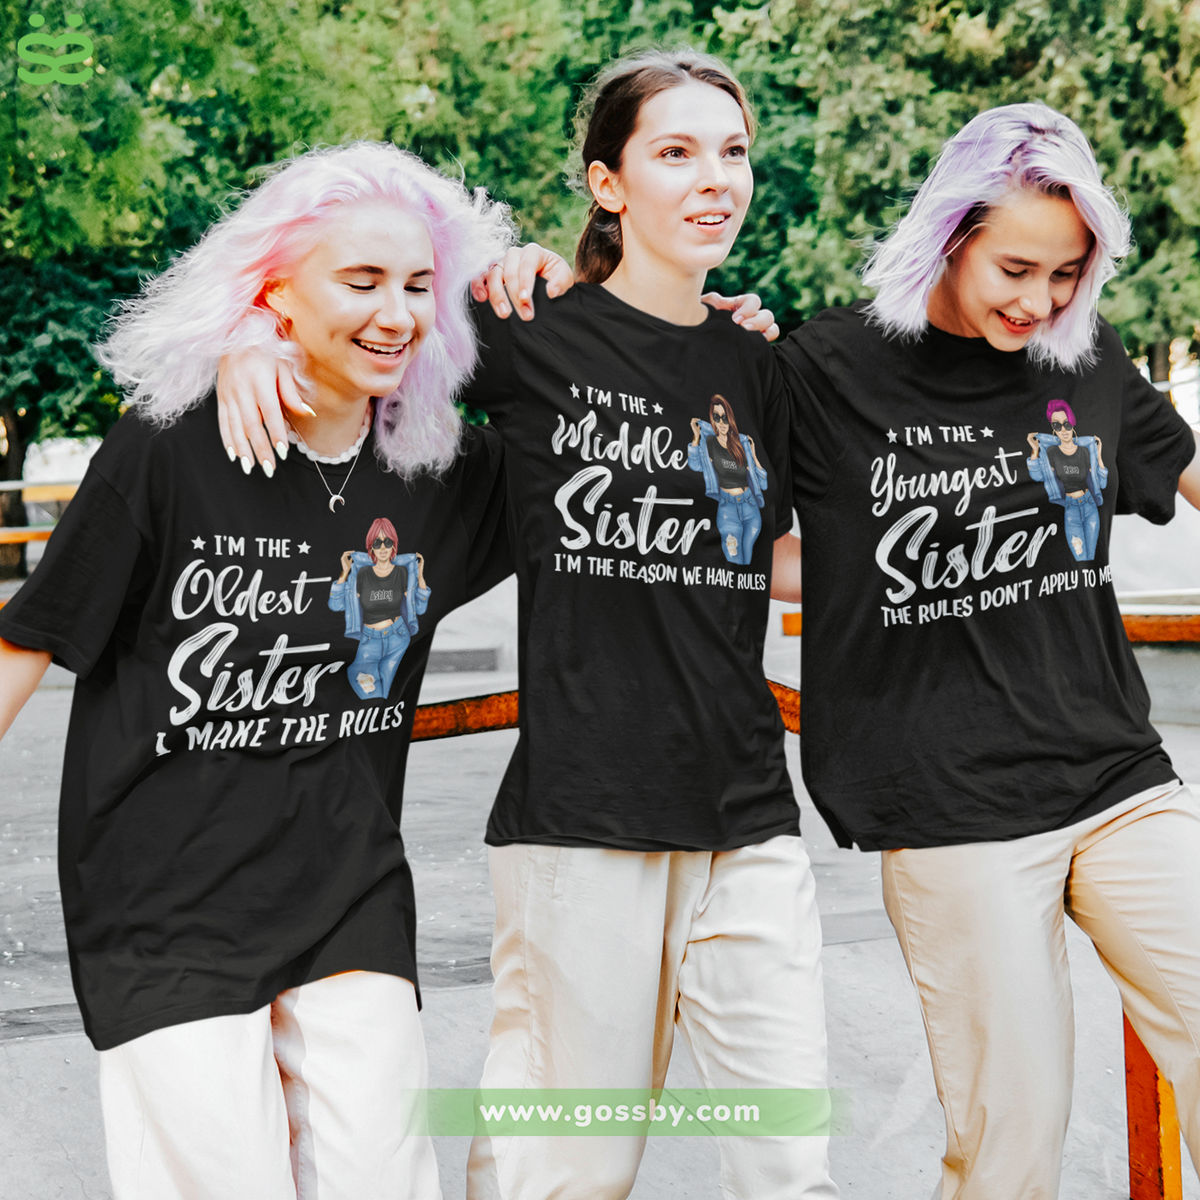 Personalized Shirt - Sisters - Sisters Are The Rules (The Oldest/Middle/Youngest Sister) V2_1